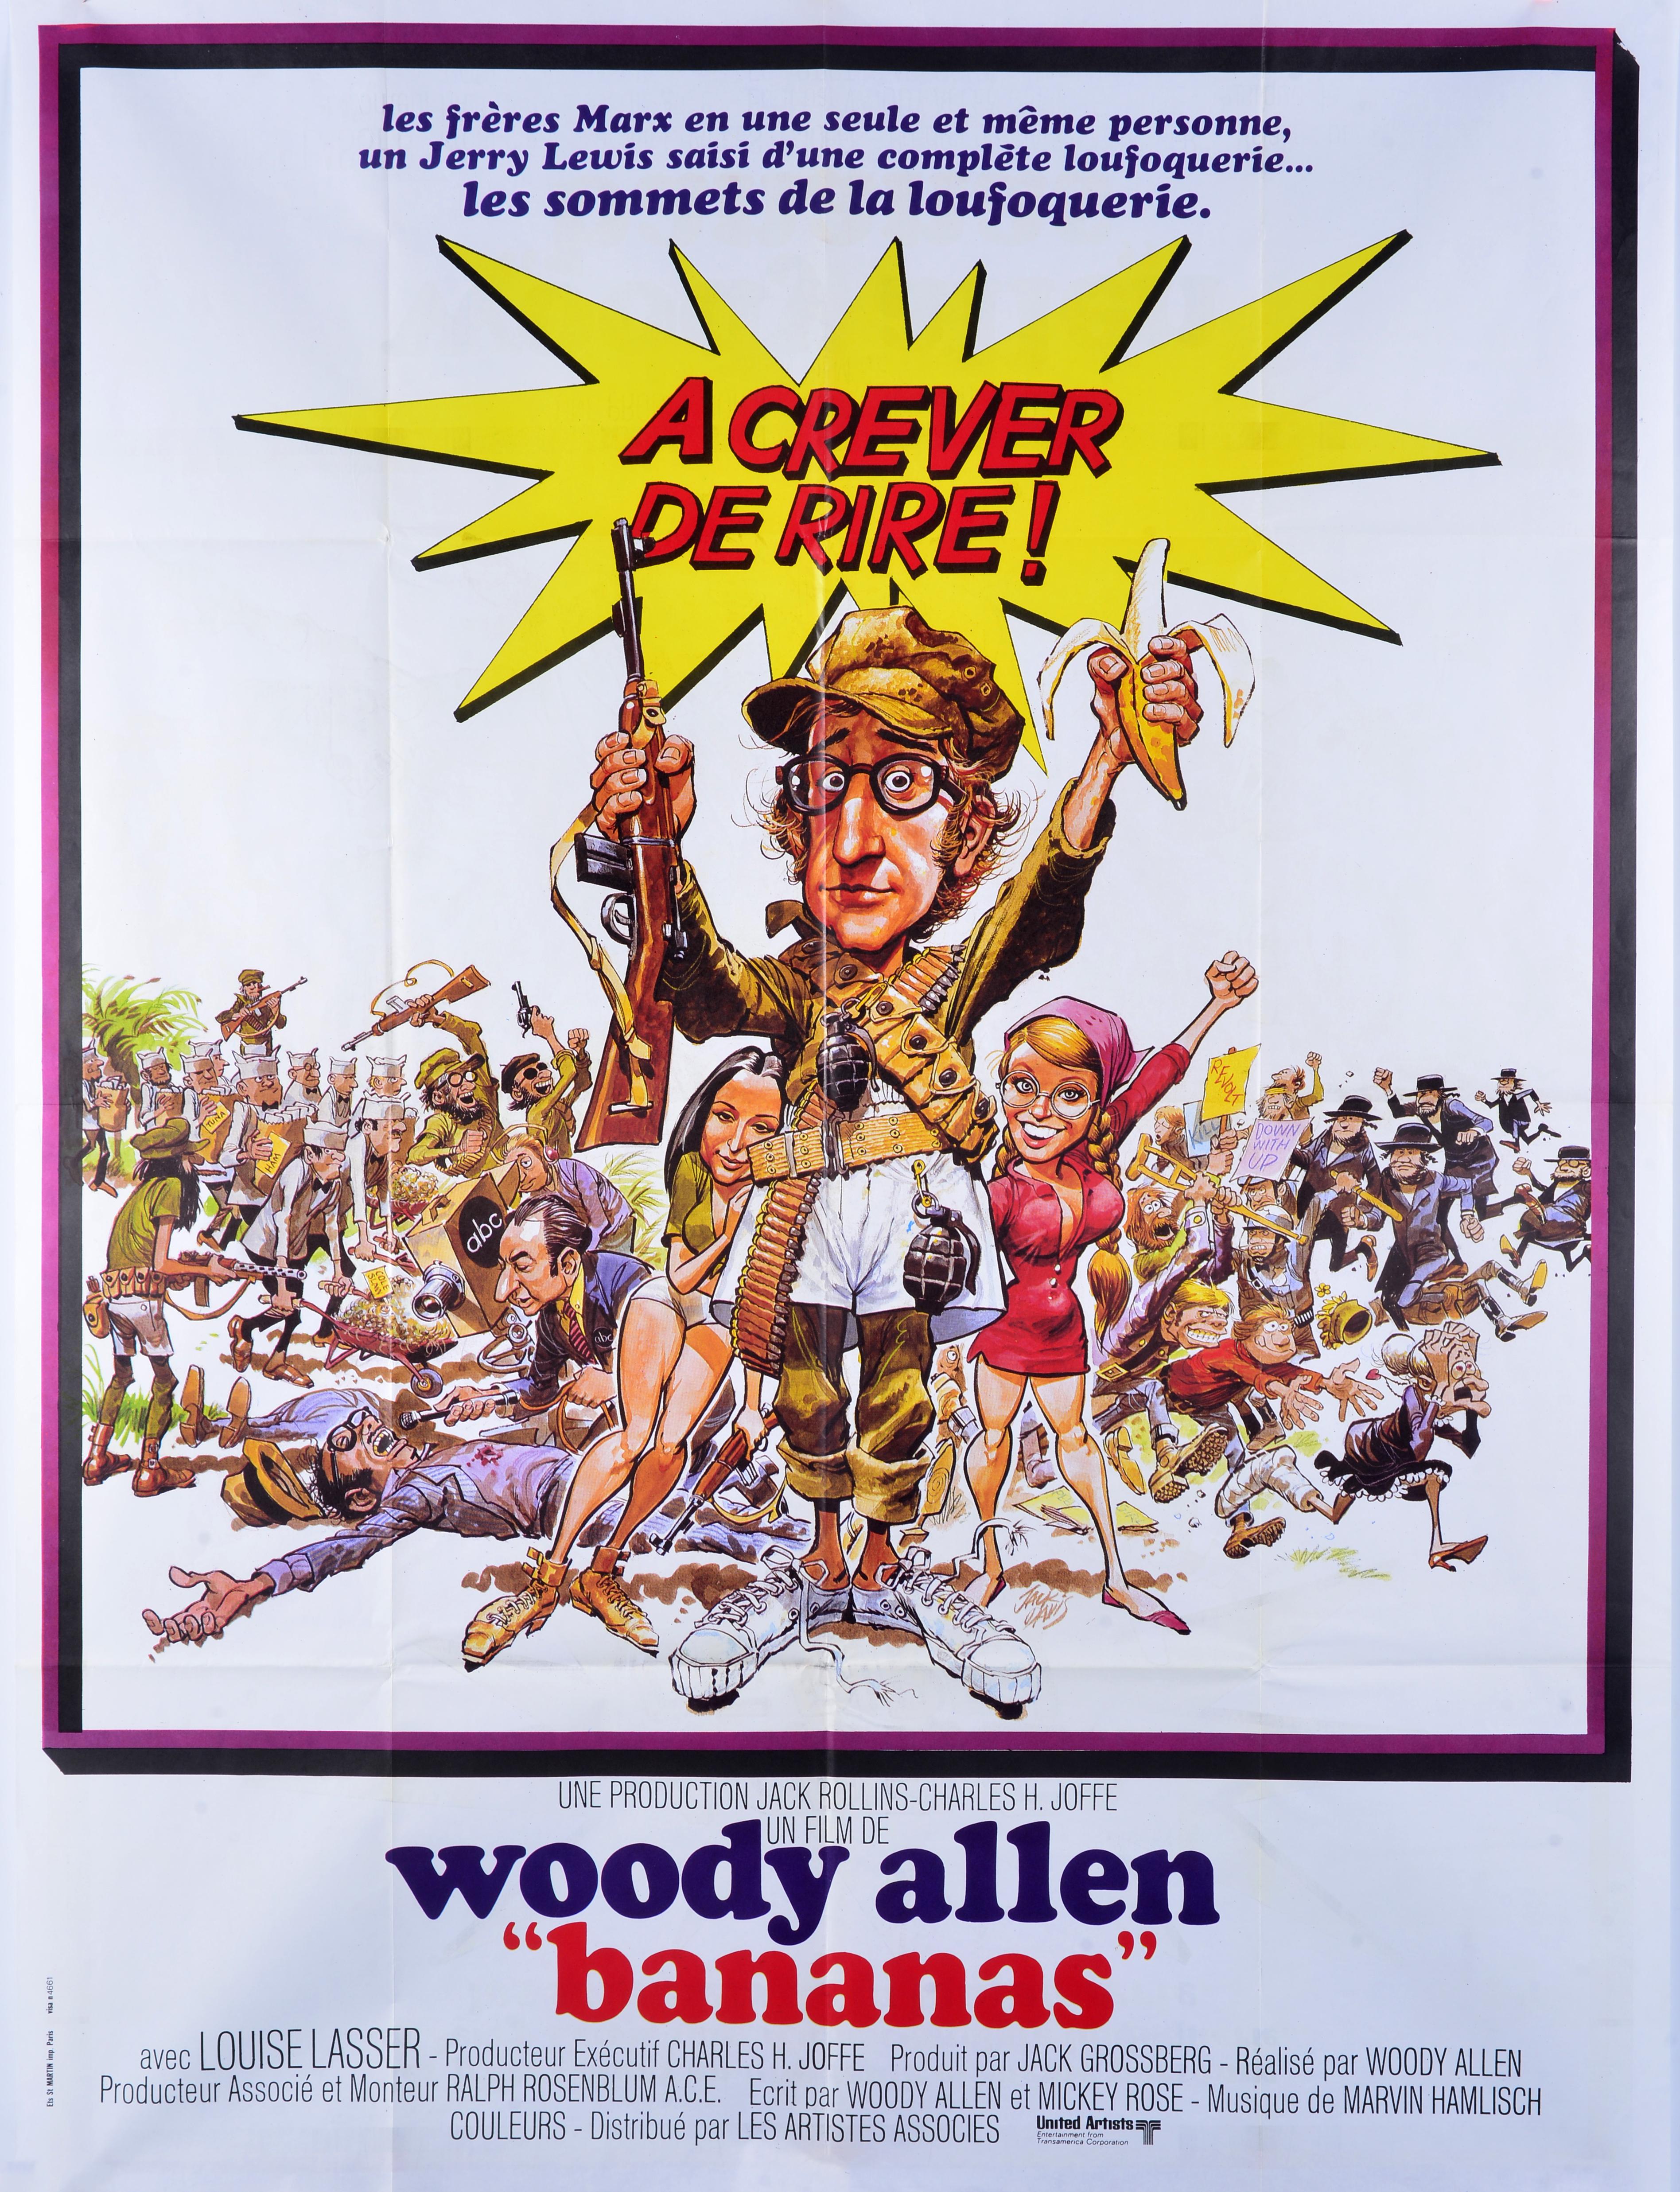 French version of the poster for Woody Allen's 1971 film Bananas.
Third film by the American actor-director, who is pictured in the centre. The poster is folded and in good condition. It can be canvas-backed if required. Can be sent by post for a